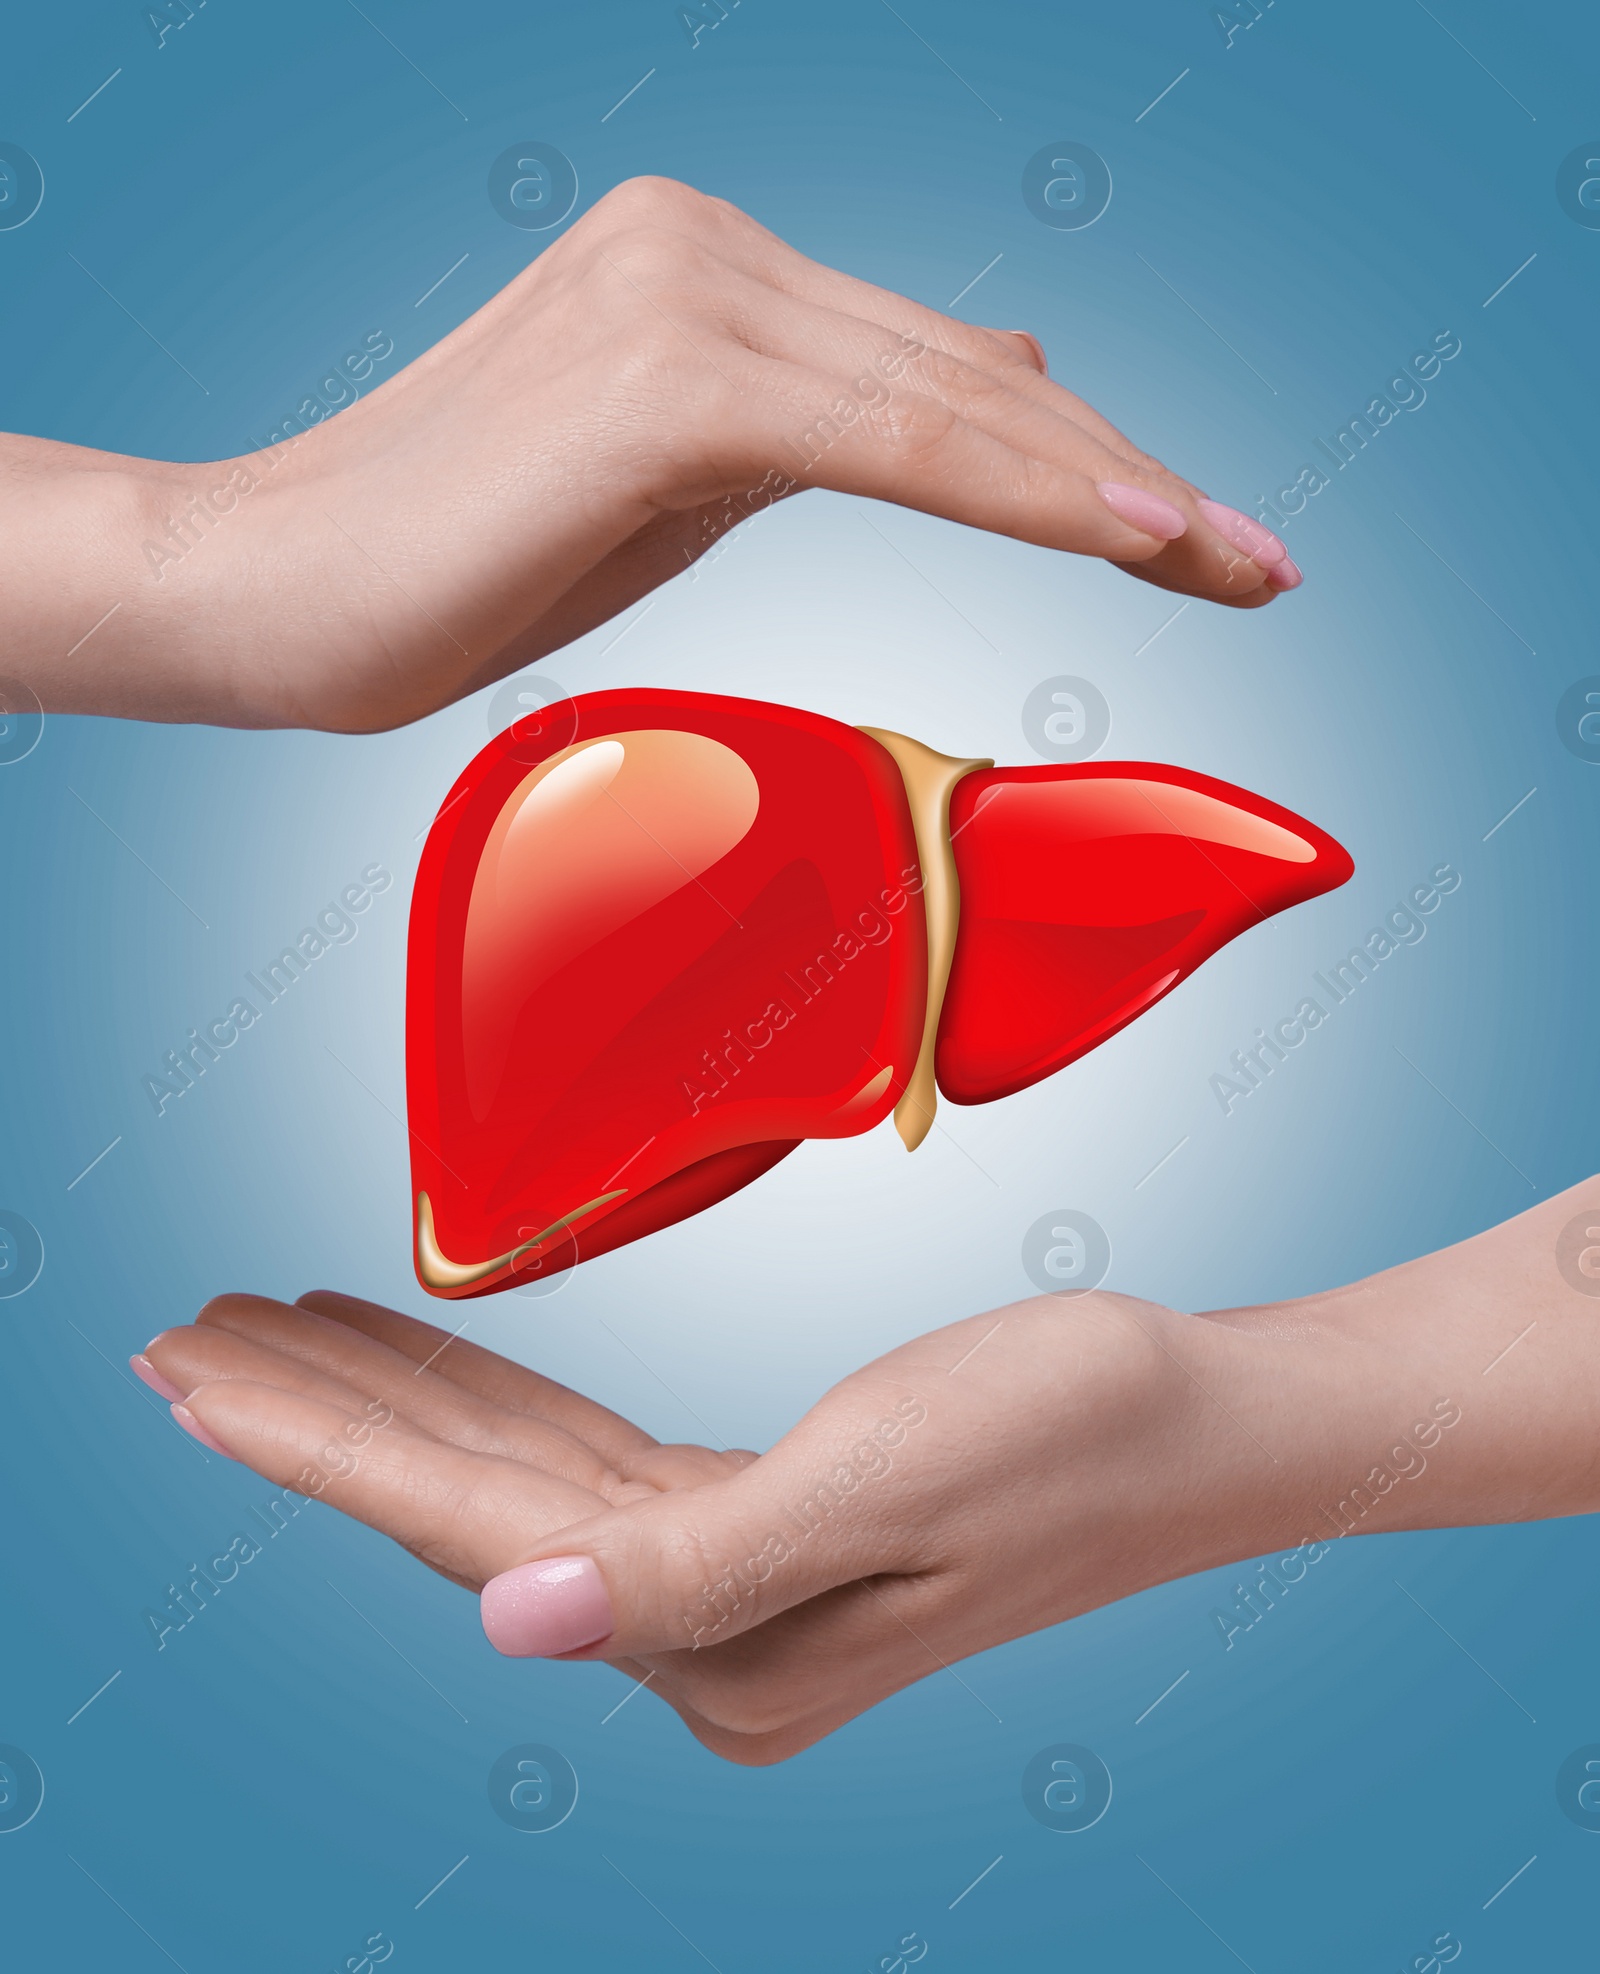 Image of Woman holding hands around illustration of liver on light blue background, closeup